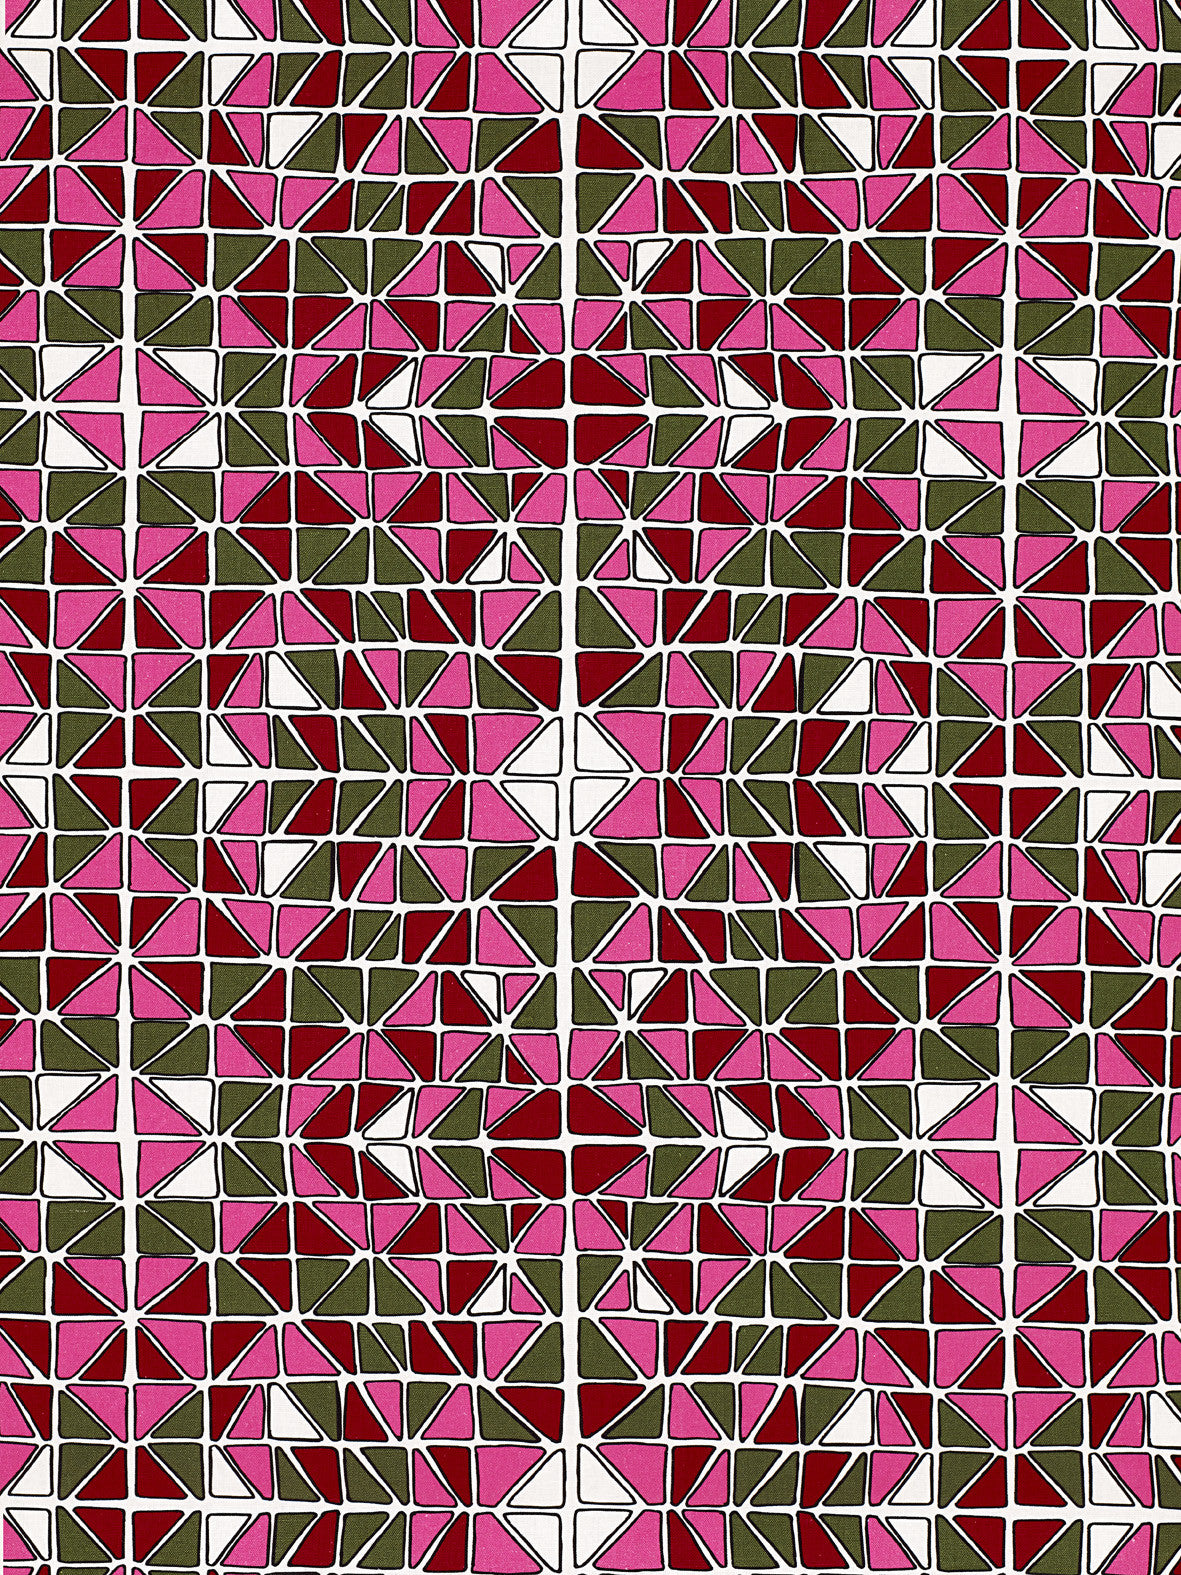 Mosaic Stained Glass Pattern Cotton Linen Home Decor Interiors Fabric by the Meter or yard in Fuchsia Pink, Green and Red for curtains, blinds or upholstery ships from Canada (USA)